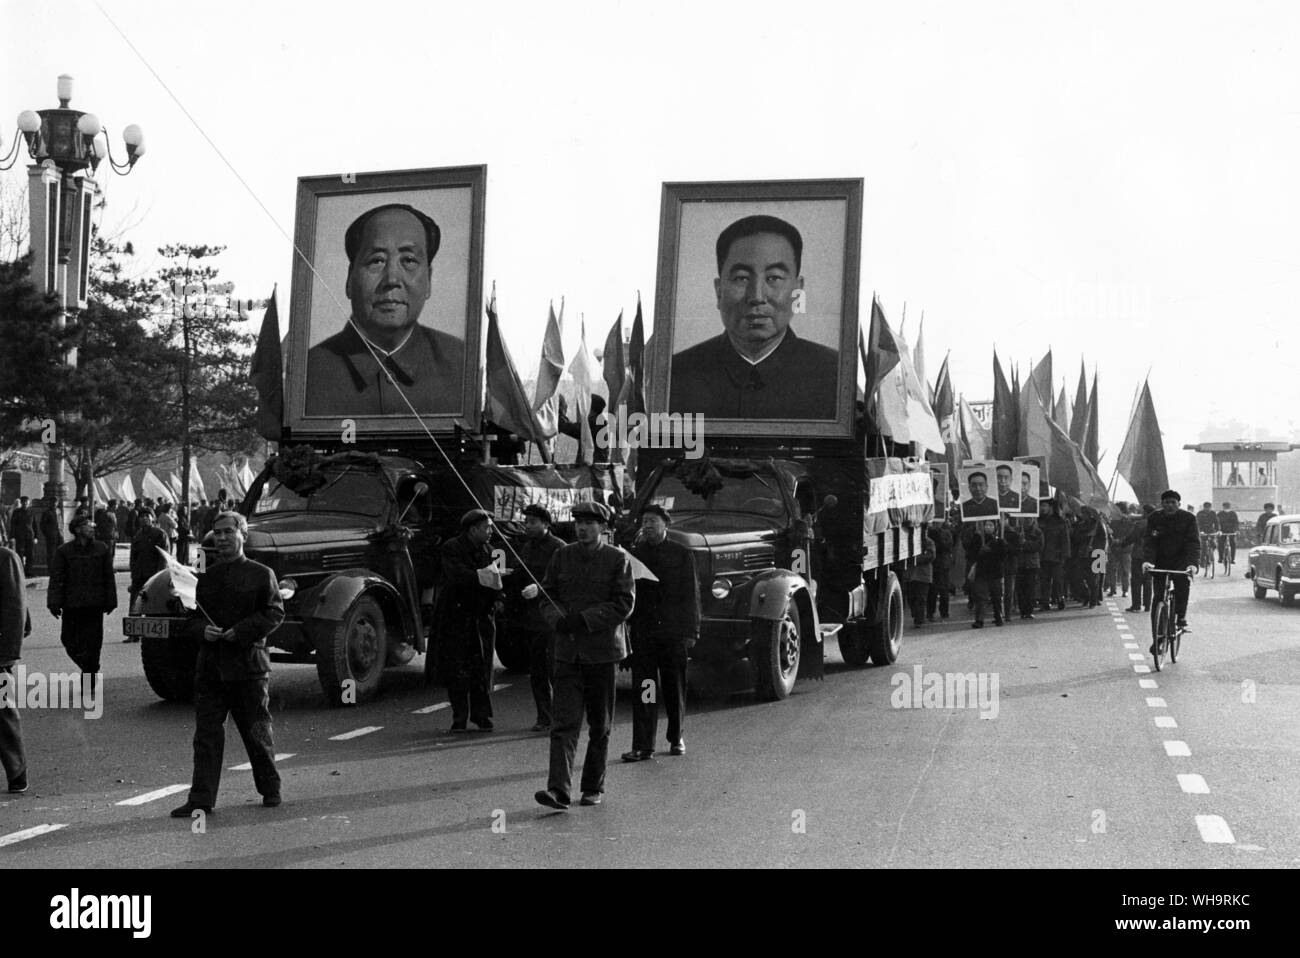 March 6th 1978: China, Peking. Portraits of the newly elected Chairman, Hua Kuo-feng and Mao Tse-Tung, during a festive parade in honour of the closing of the Fifth National People's Party Congress. On Chang Avenue, Peking. Stock Photo